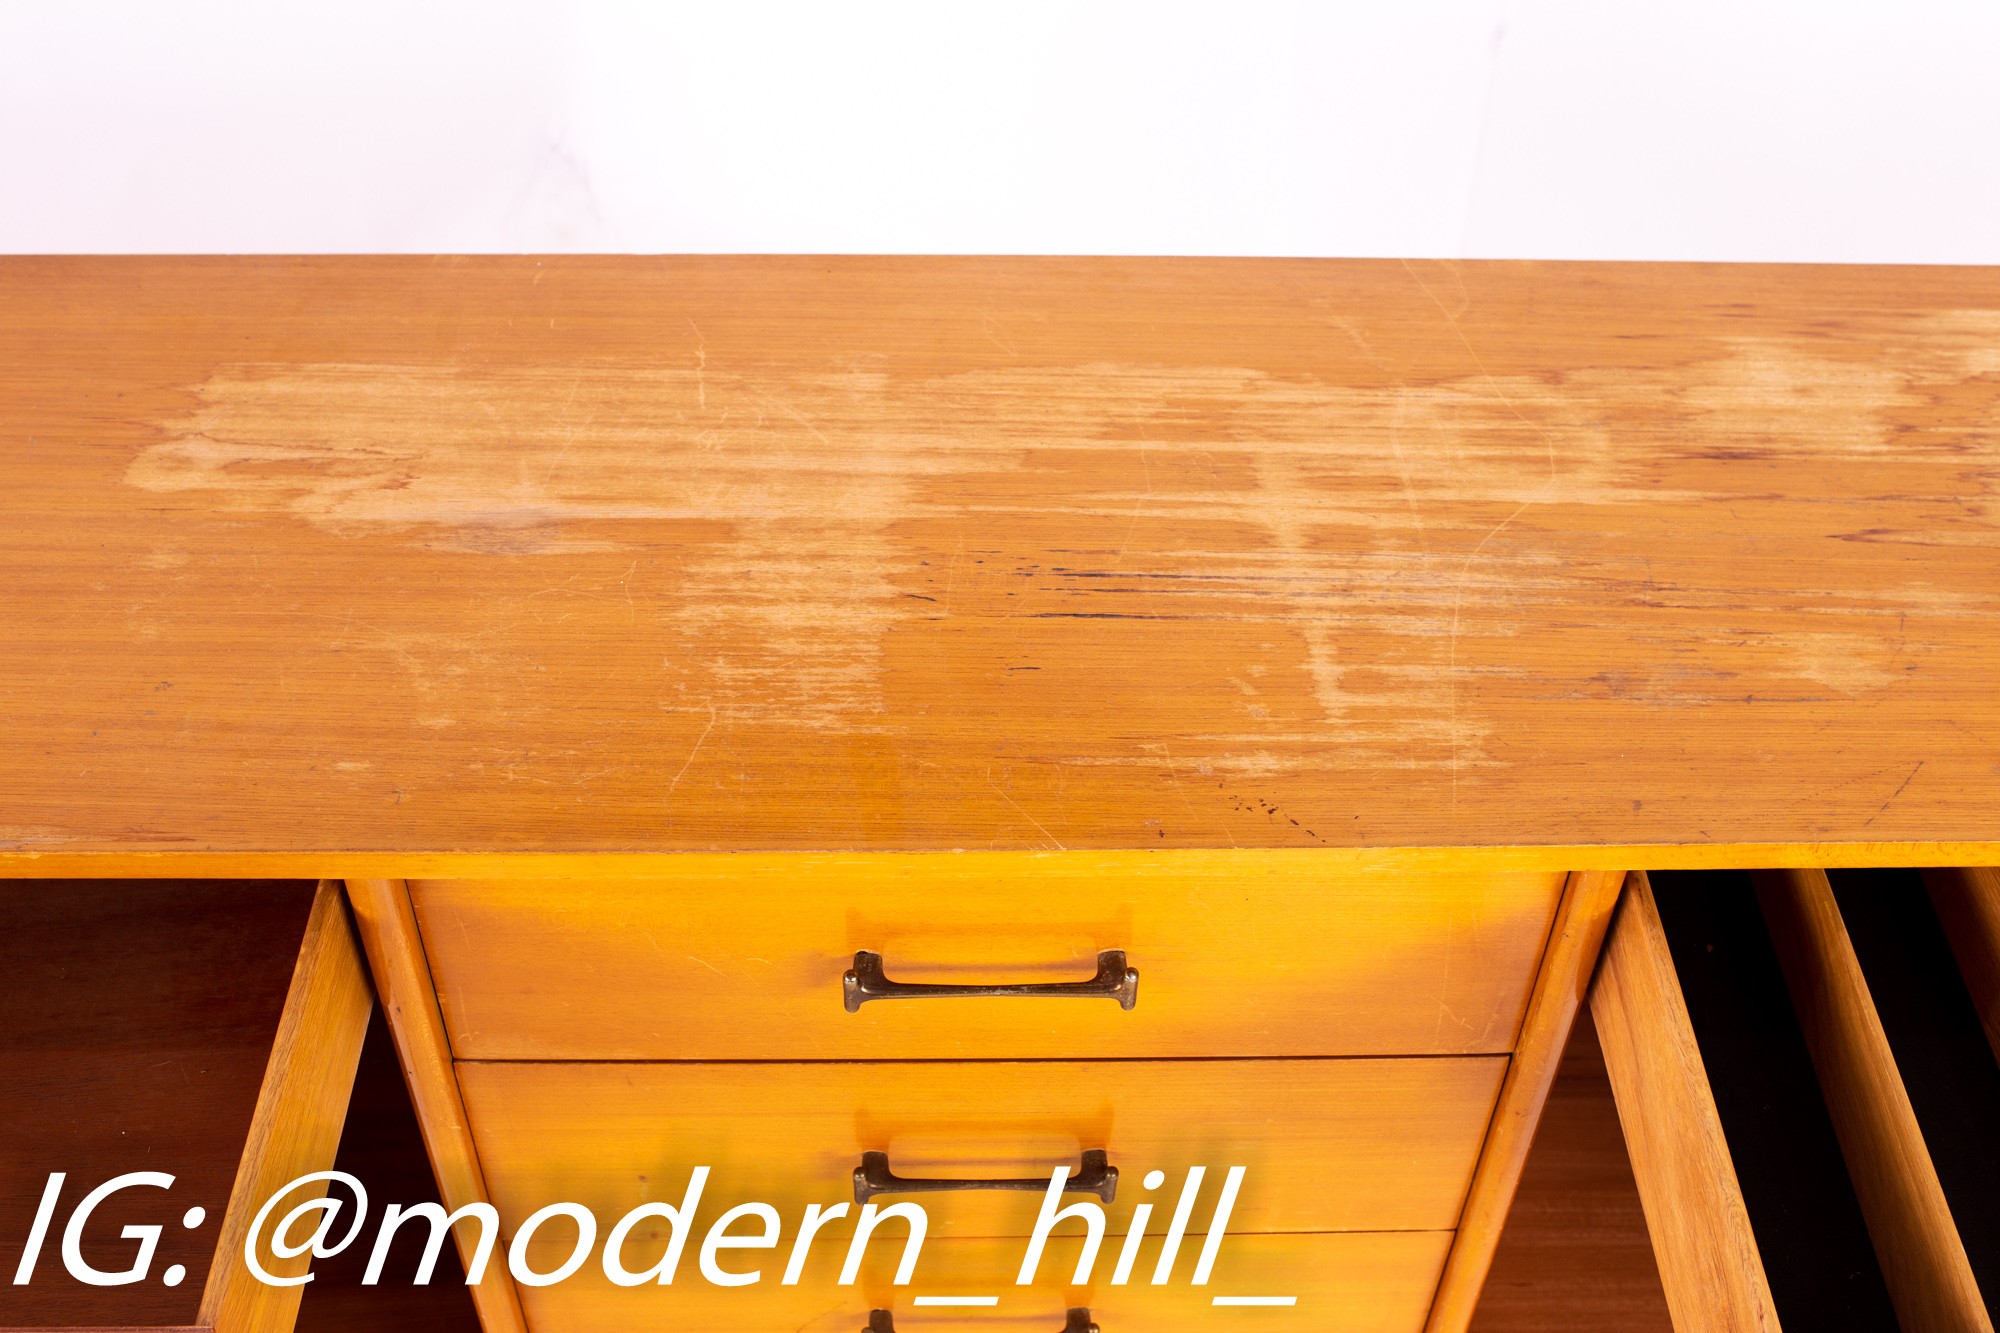 Restored Milo Baughman for Drexel Today's Living Mid Century Blonde Sideboard Credenza Buffet